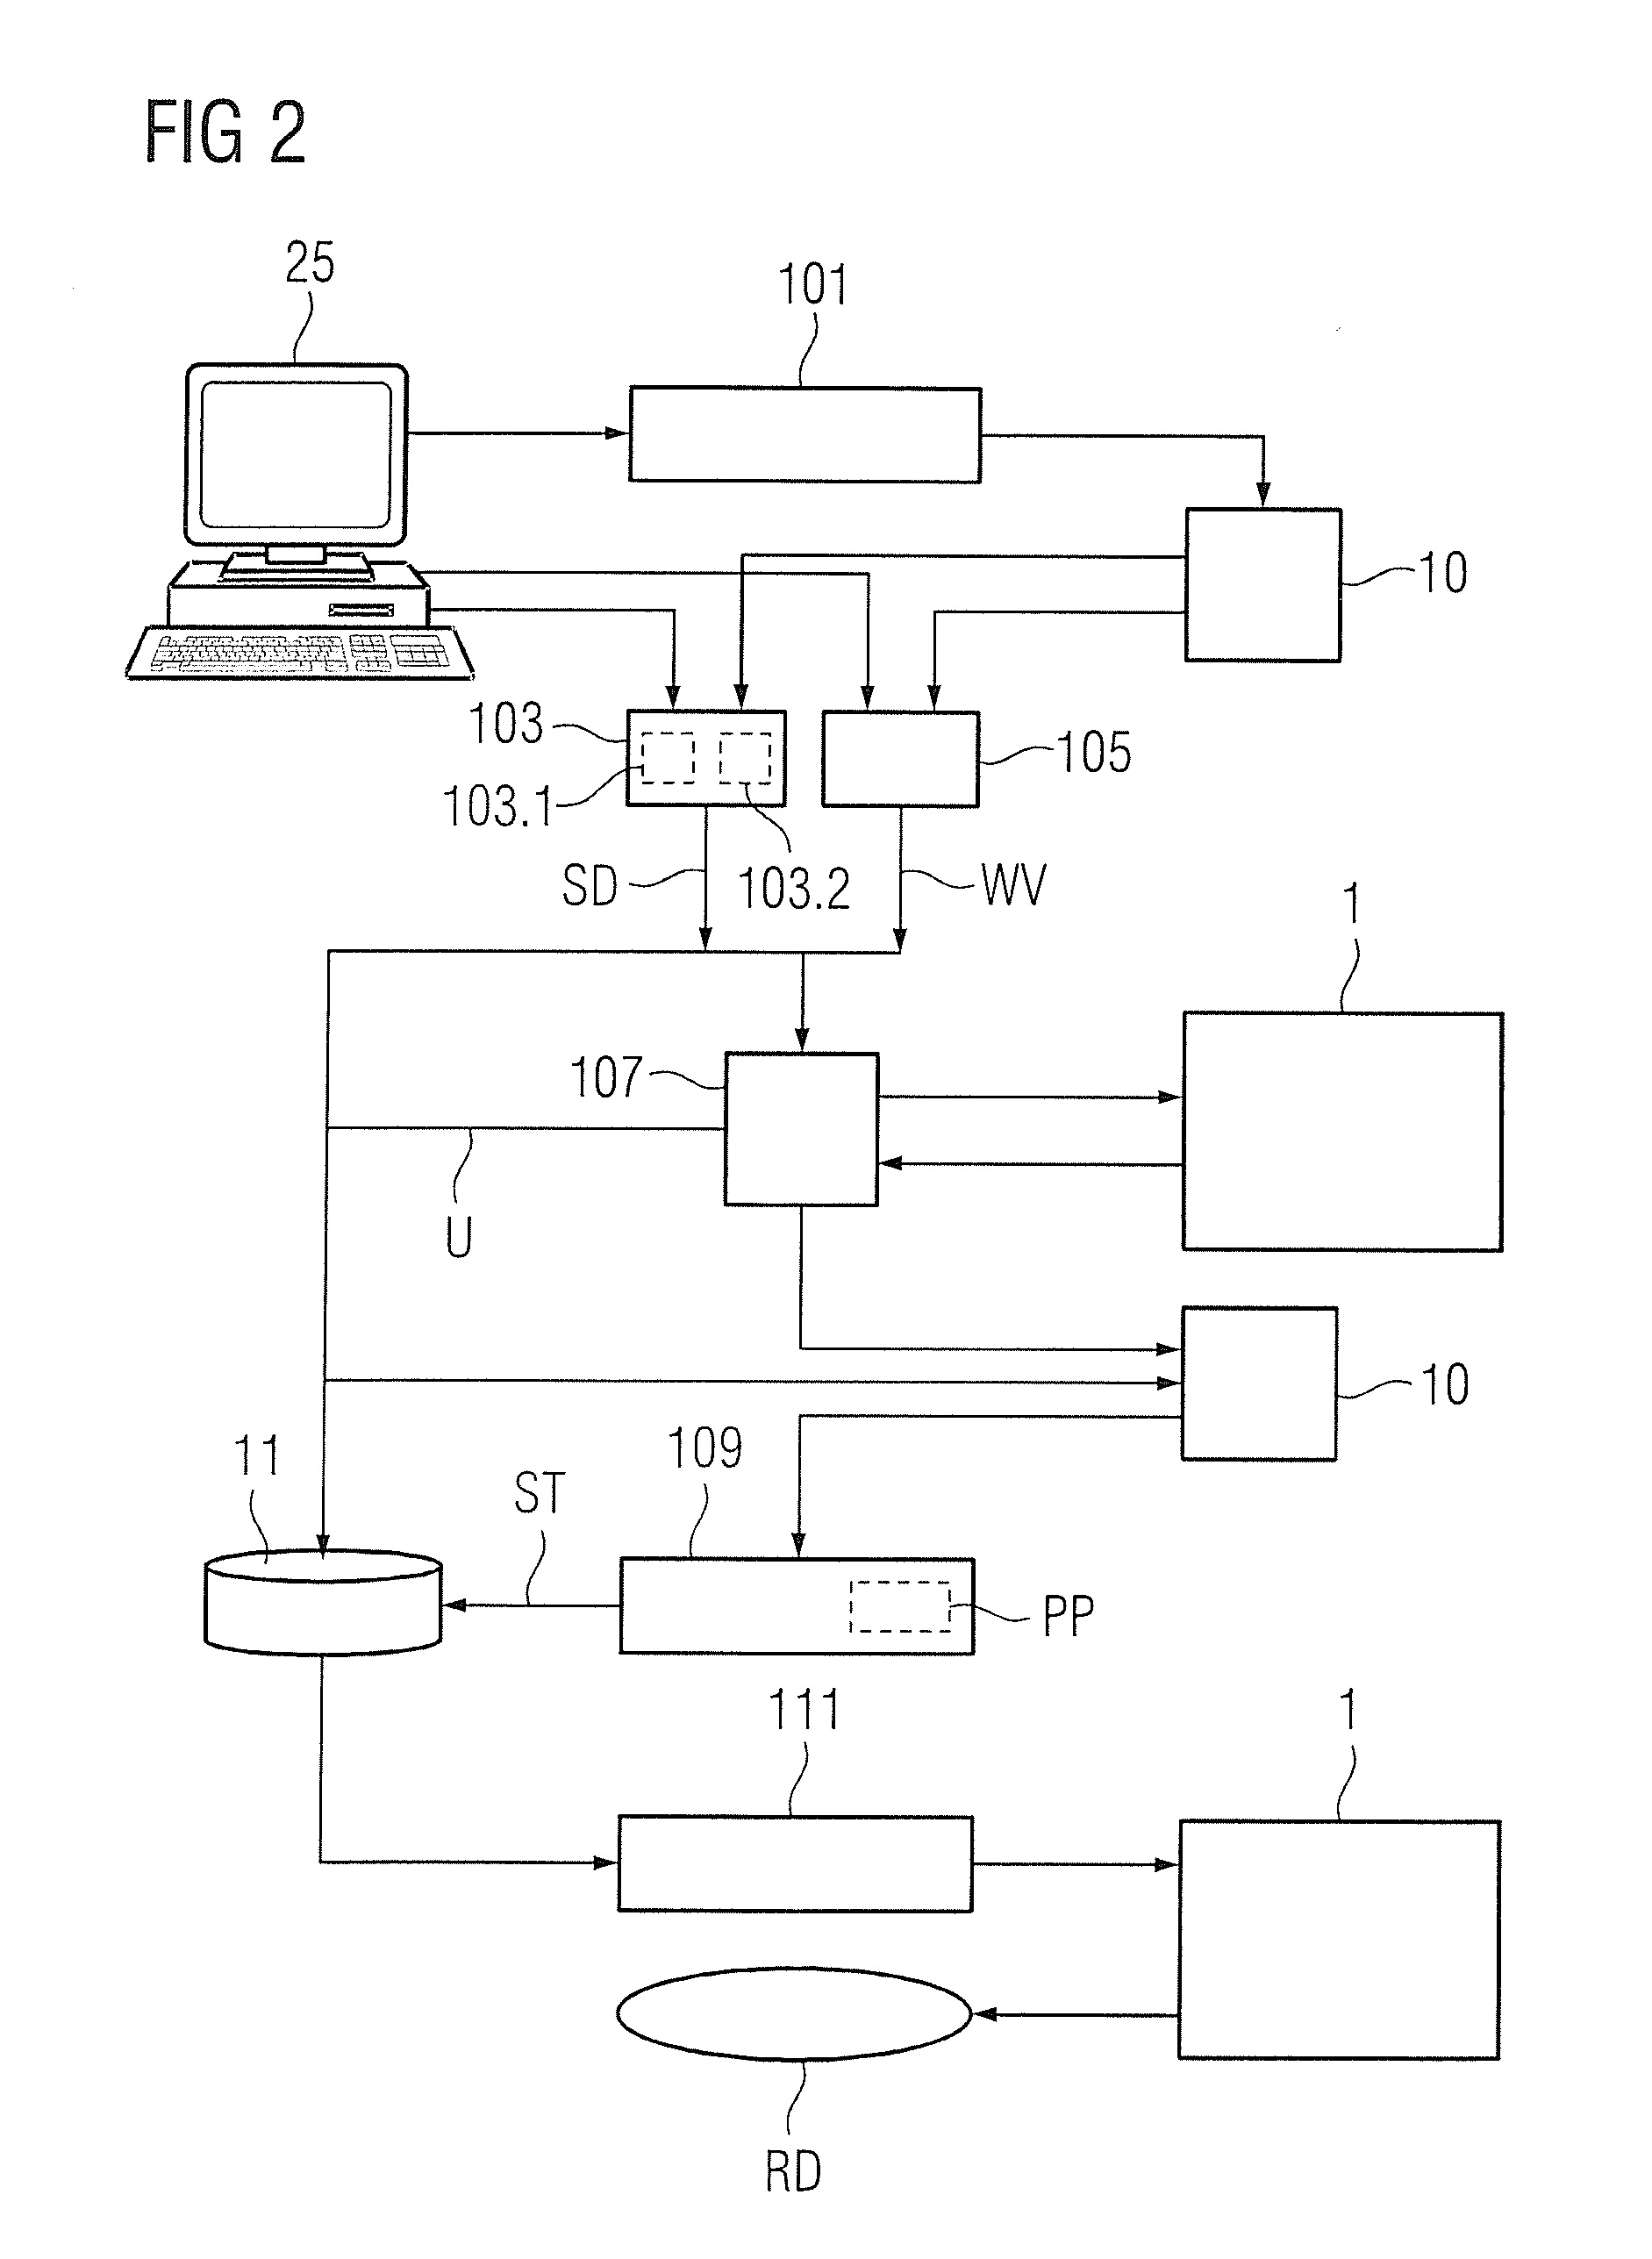 Medical imaging apparatus having multiple subsystems, and operating method therefor